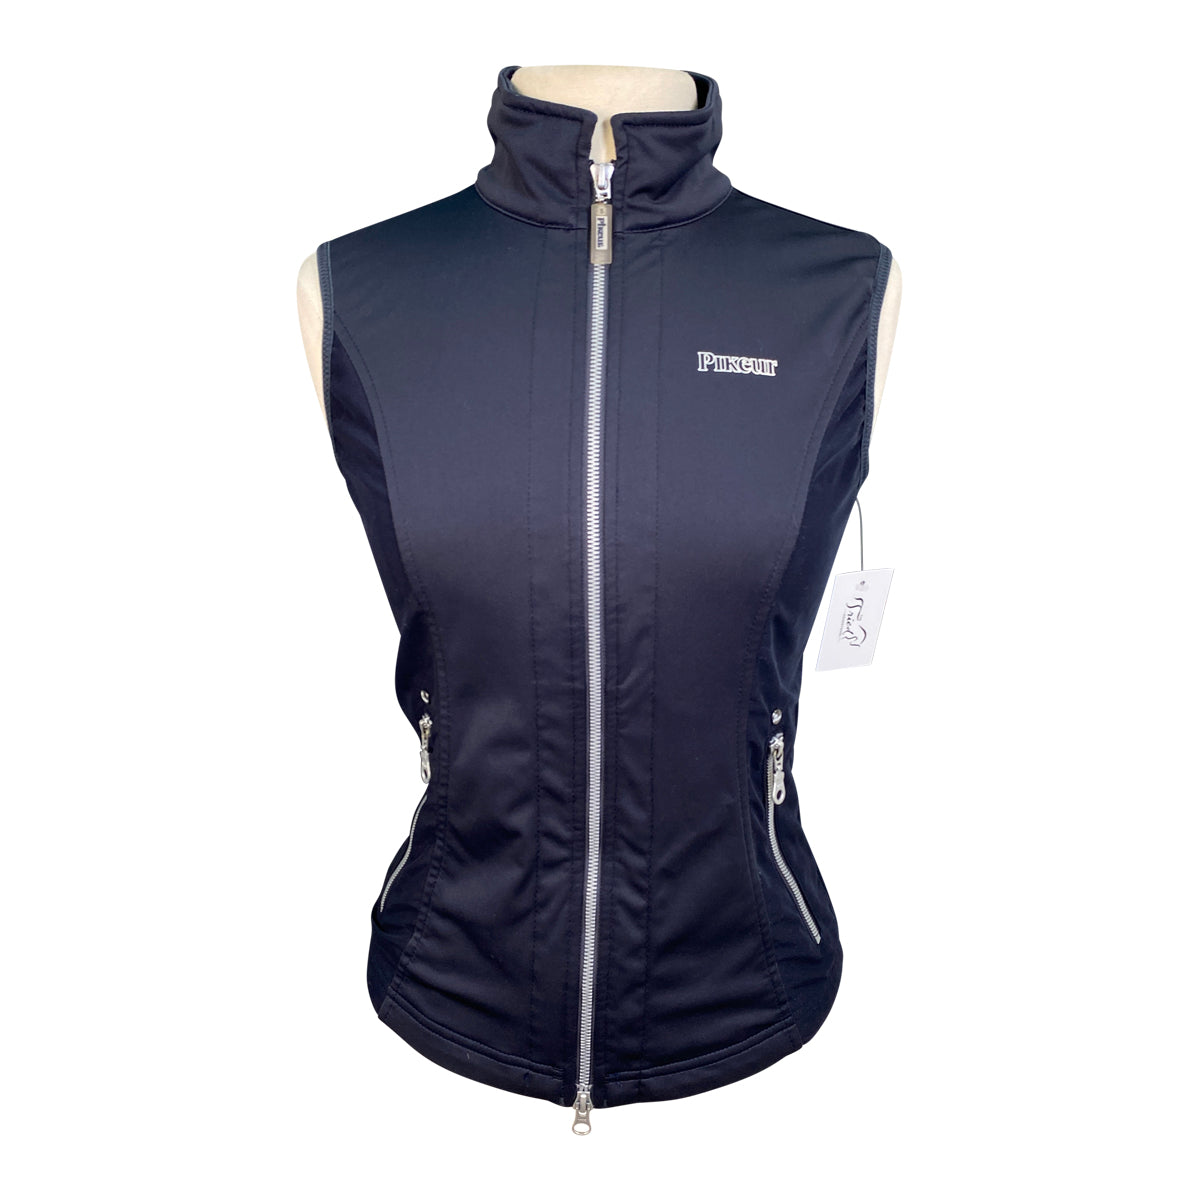 Pikeur 'Nika' Soft Shell Vest in Night Blue